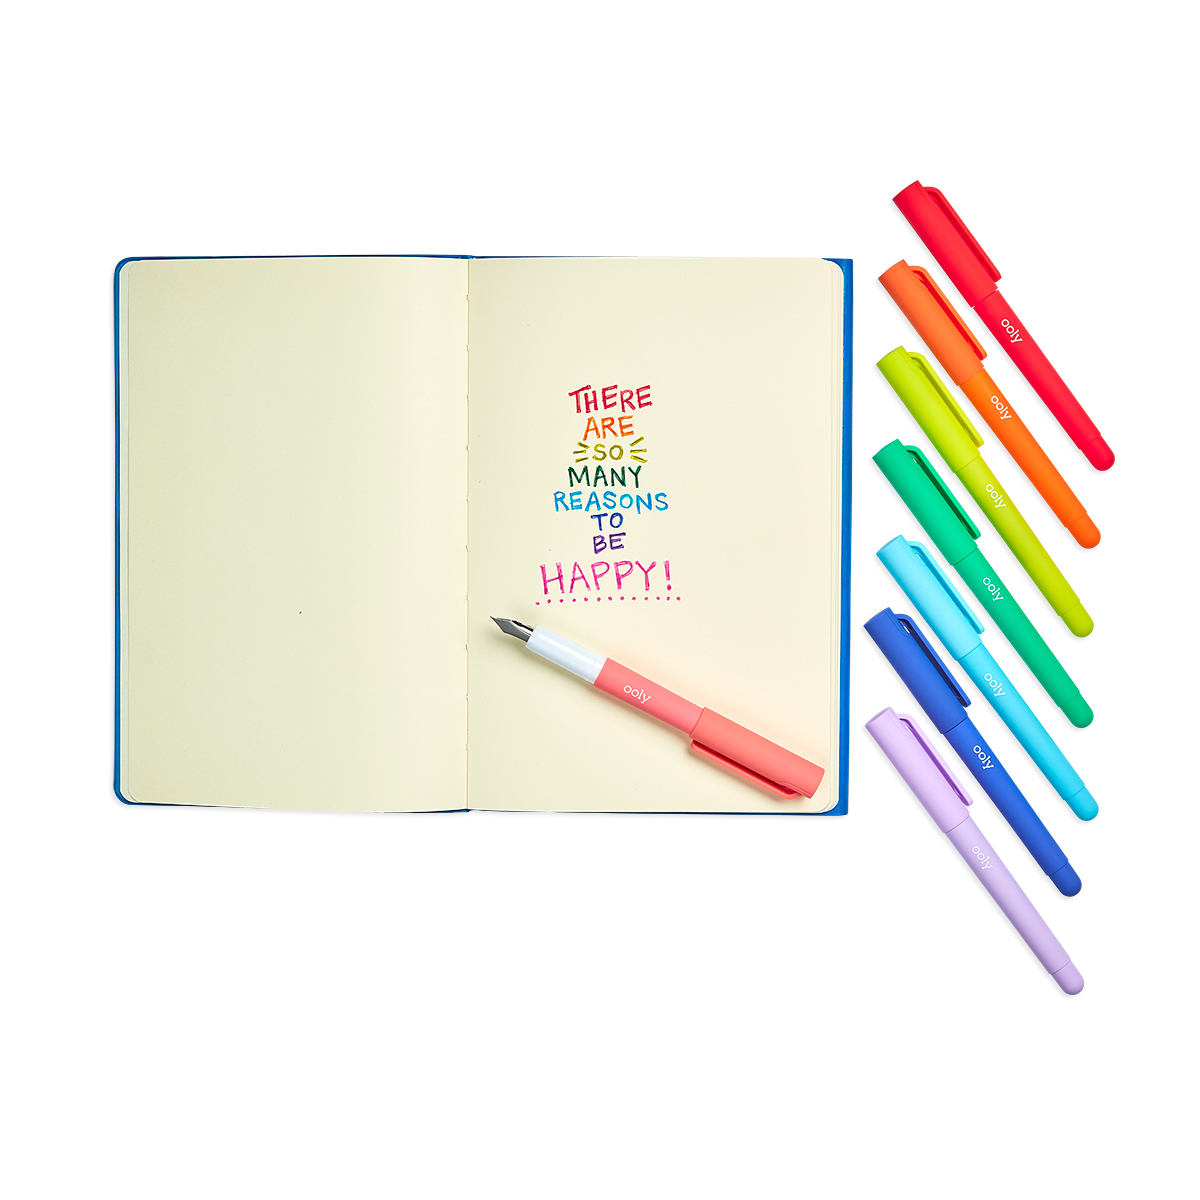 OOLY - Fountain pen obsessed? Well we just made dreams come true with  rainbow colored ink fountain pens in our Color Write set 😍 😍 😍